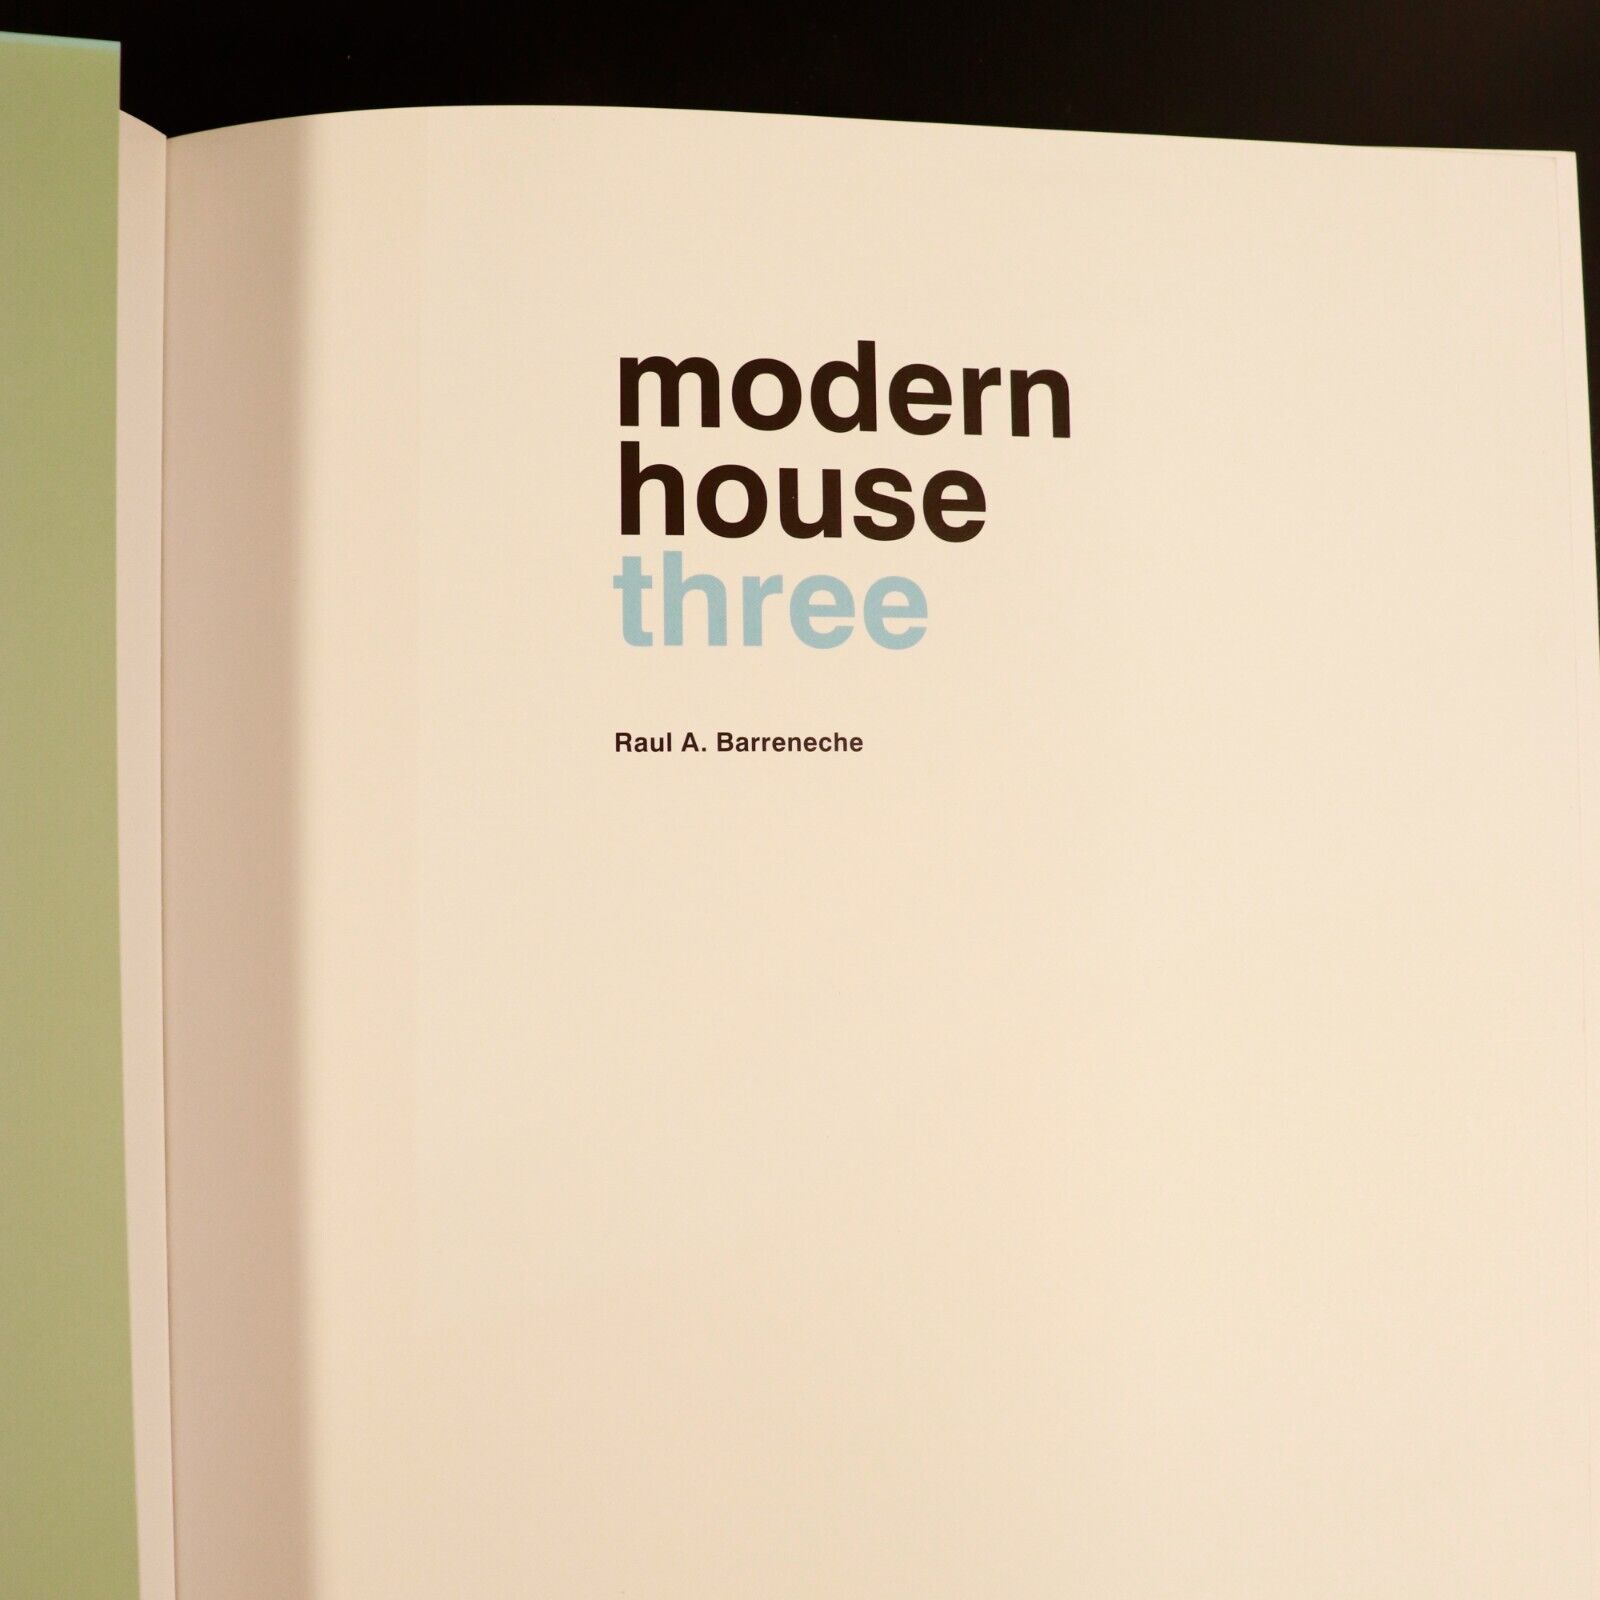 2008 Modern House Three by Raul A. Barreneche Architecture Reference Book